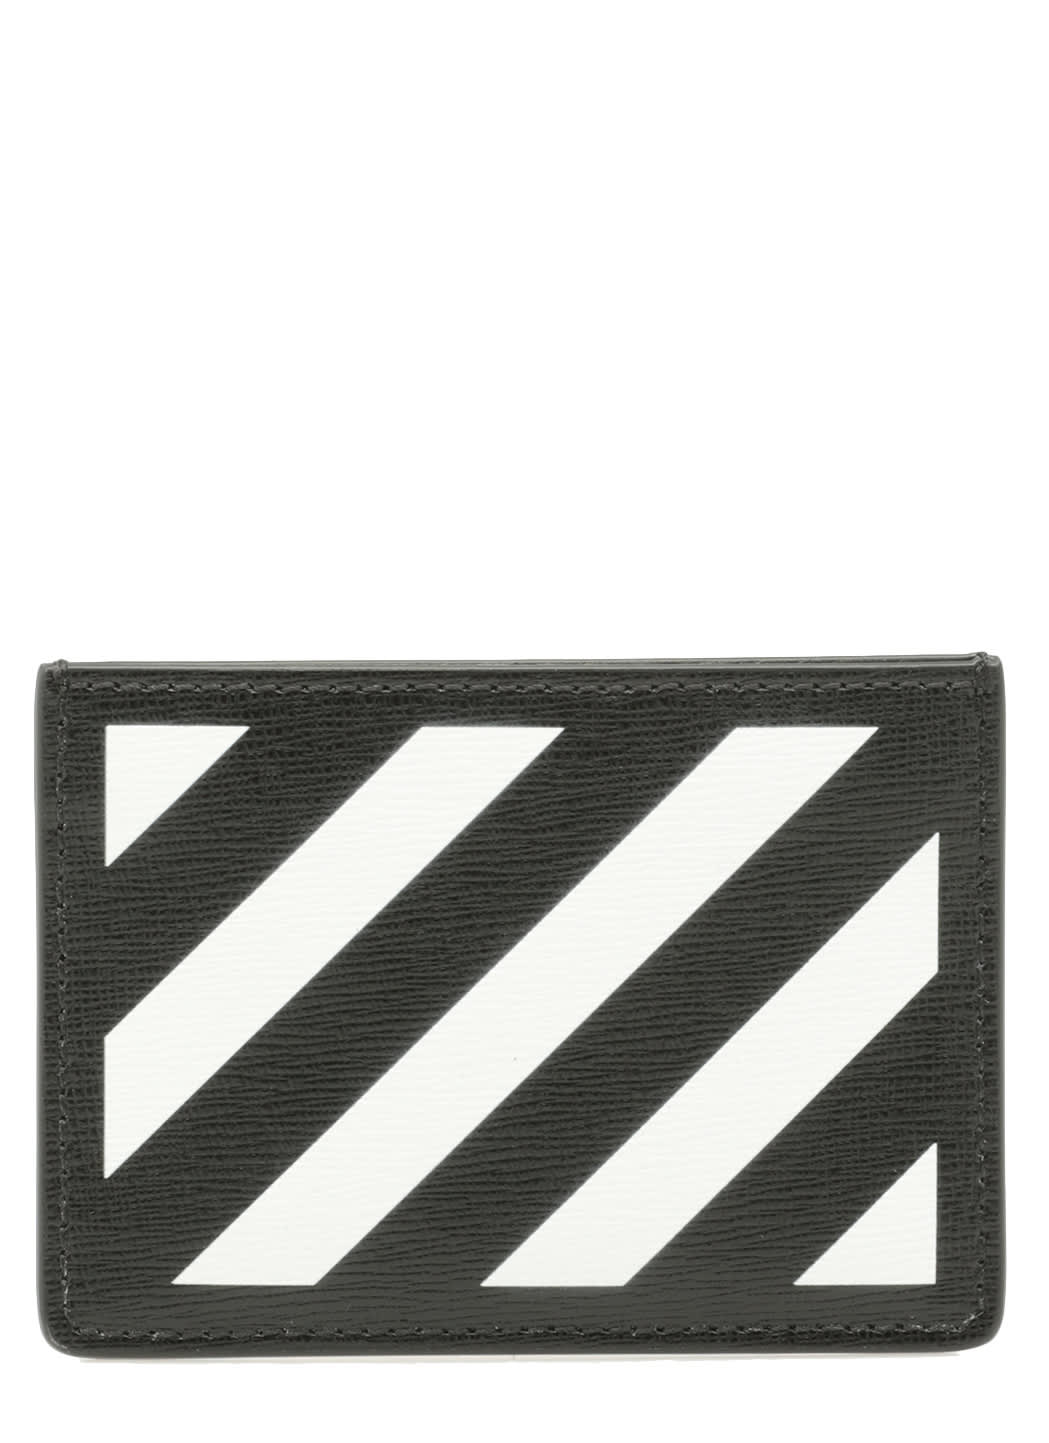 OFF-WHITE DIAG LEATHER CARD HOLDER,11784407